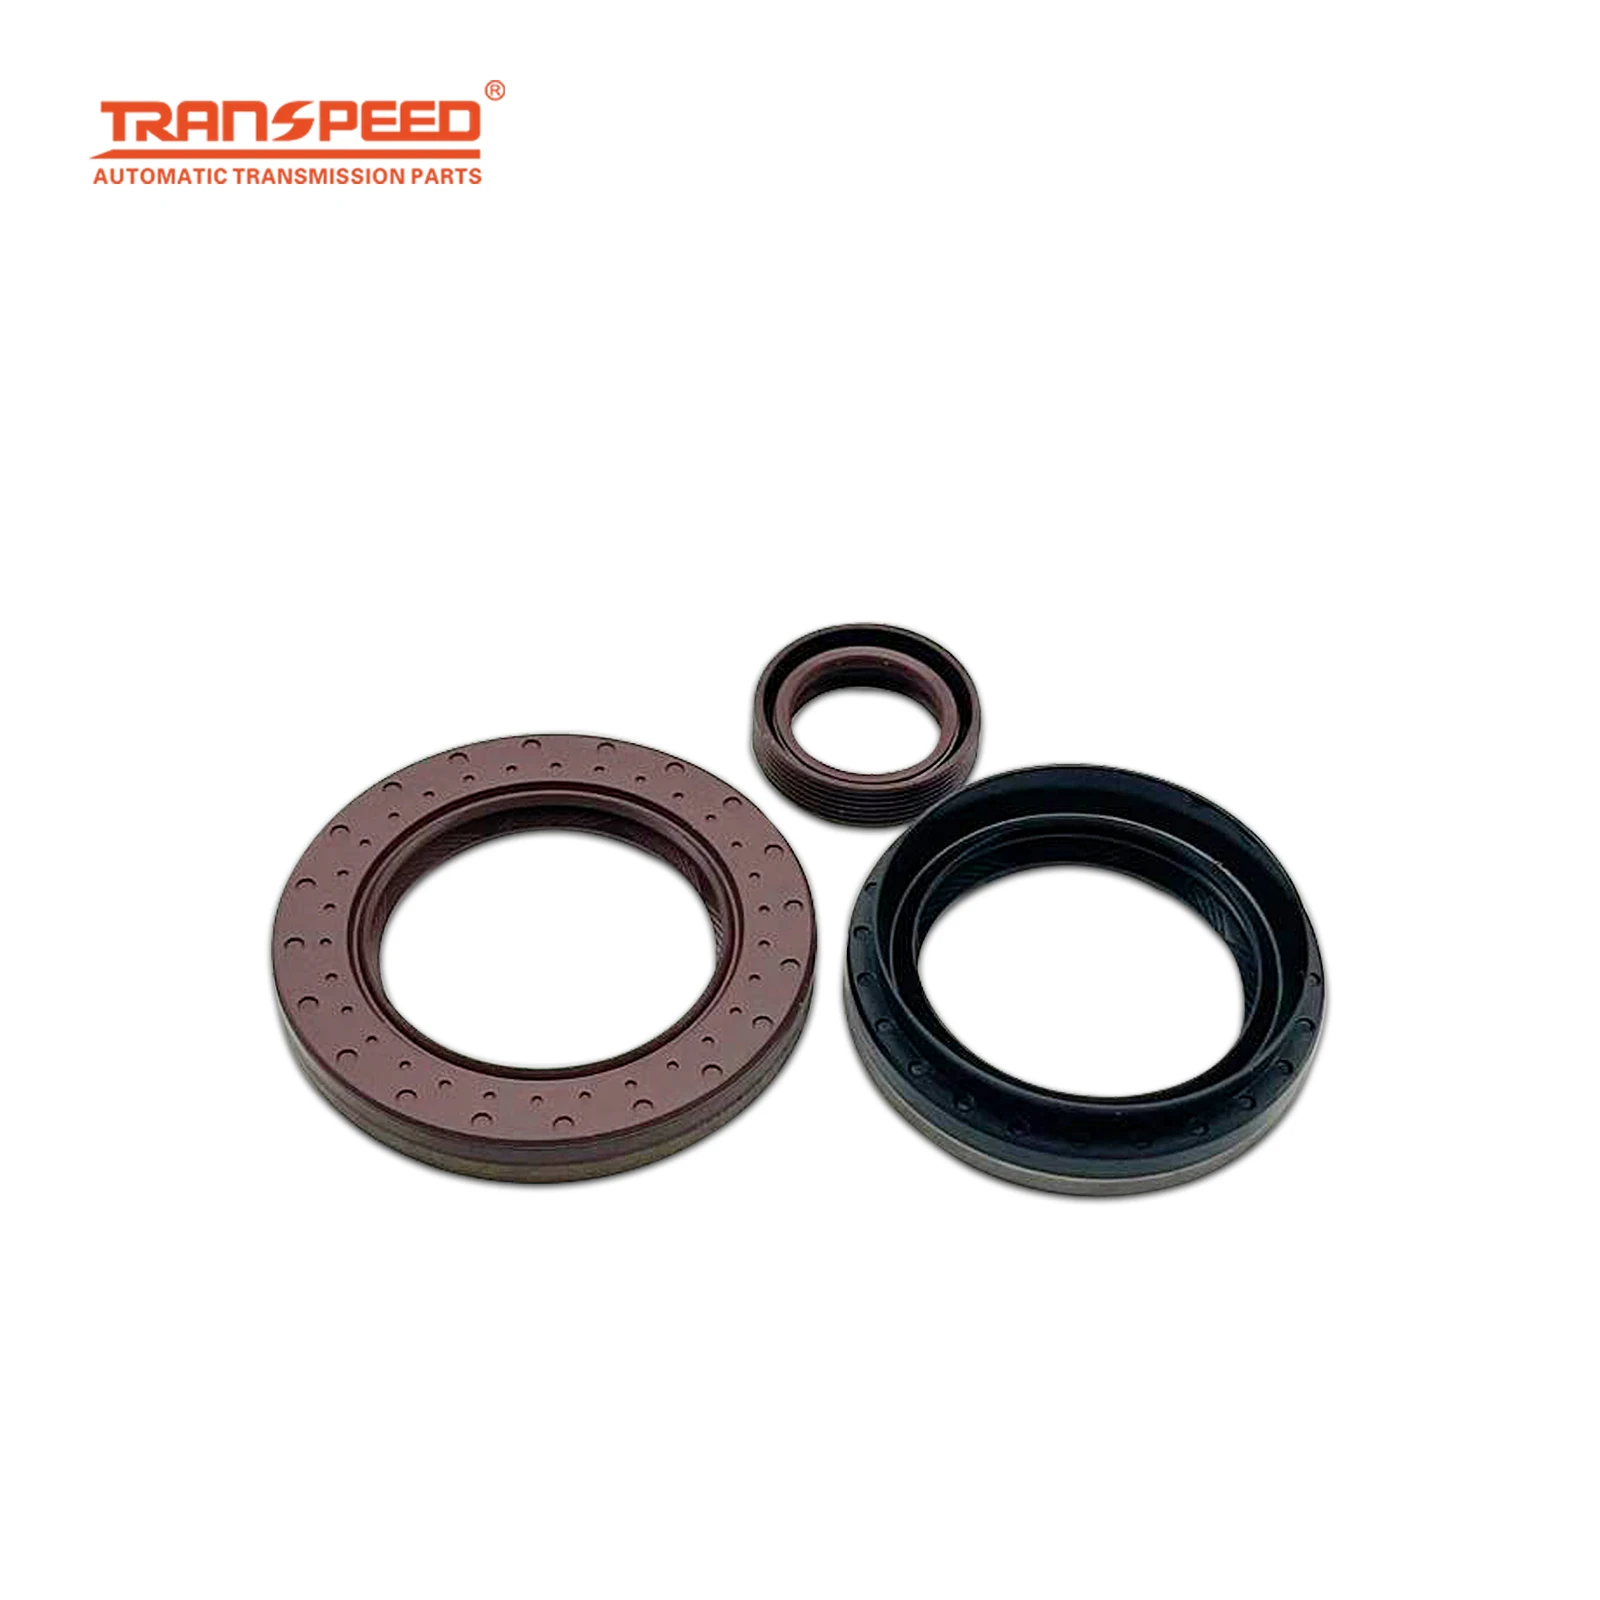 

TRANSPEED DPS6 6DCT250 Automatic Transmission Left Right Half Shaft Oil Seal Kit For Ford Focus Fiesta EcoSport Car Accessories